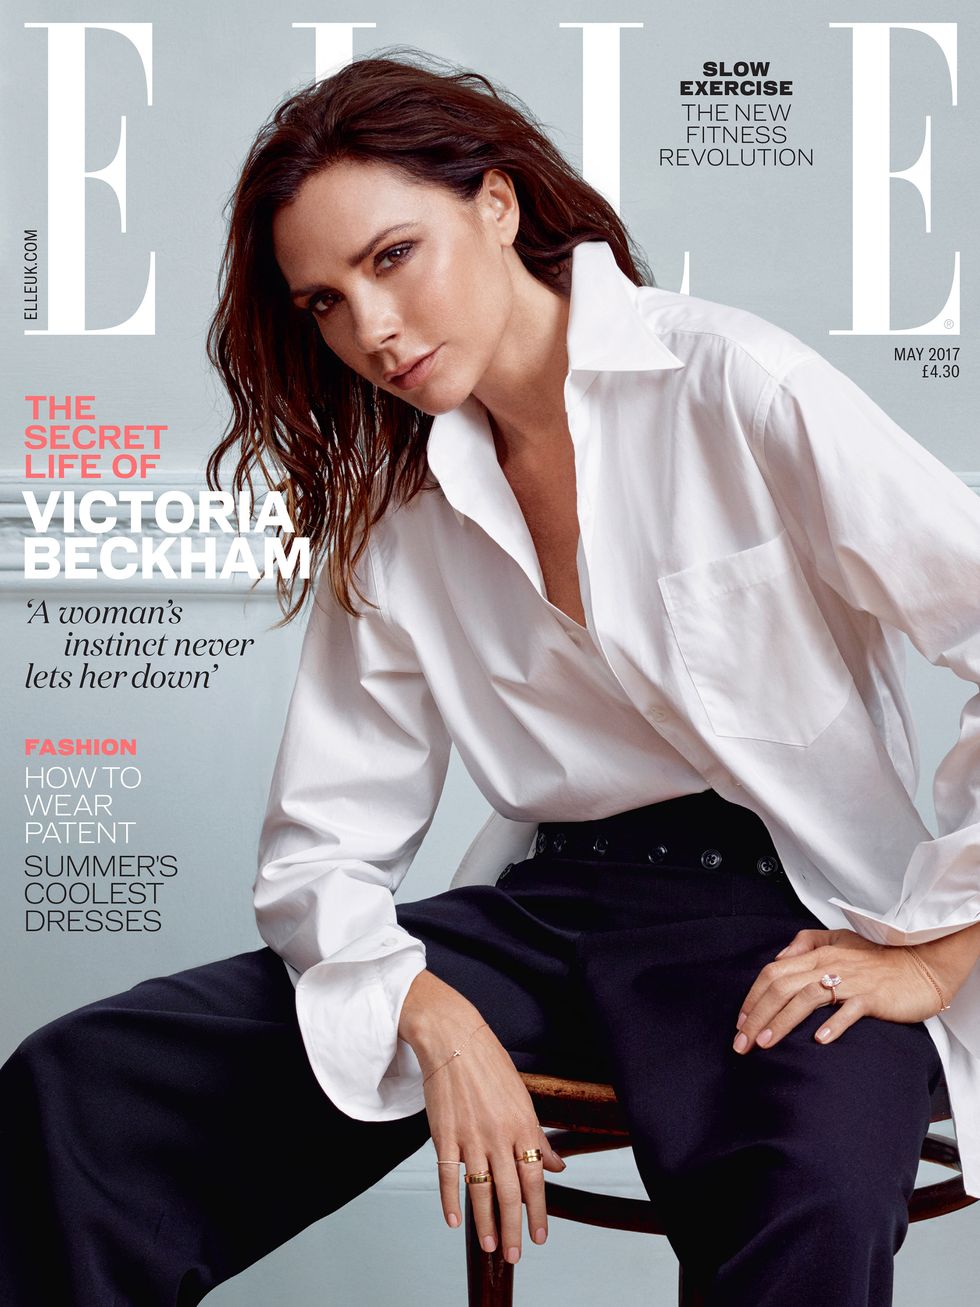 Victoria Beckham on Elle UK's May 2017 cover